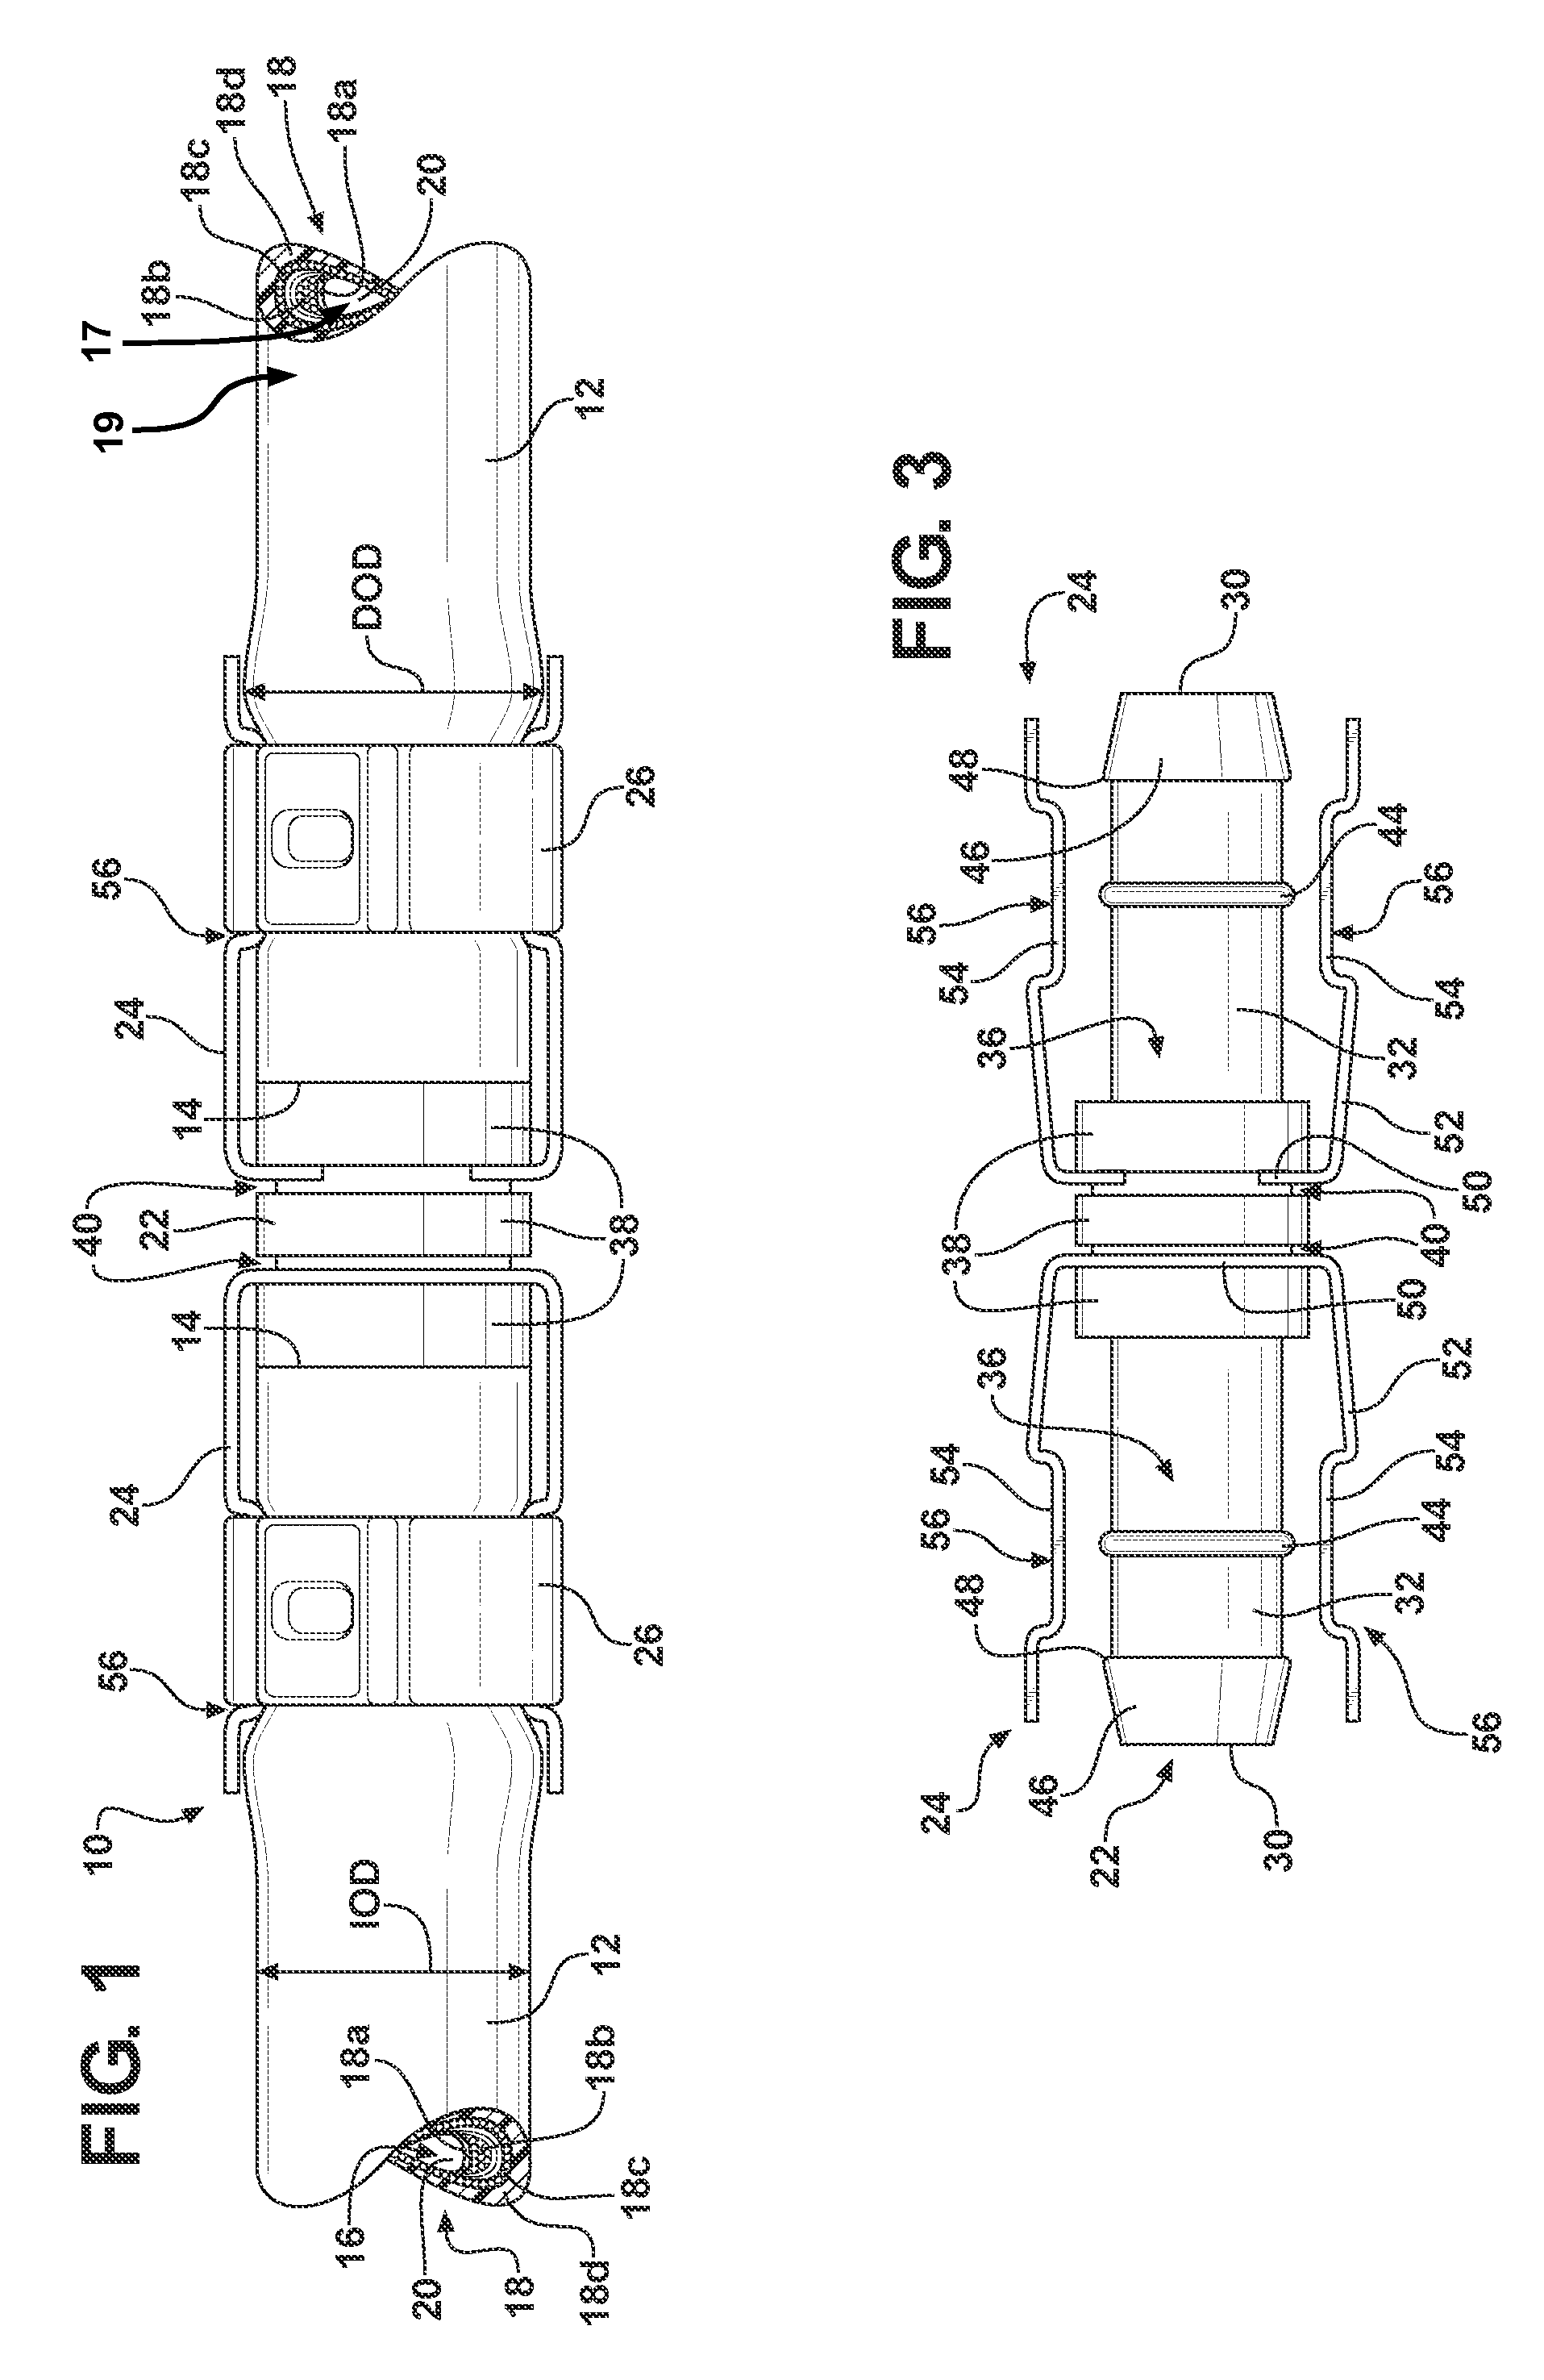 Coupling assembly for connection to a hose